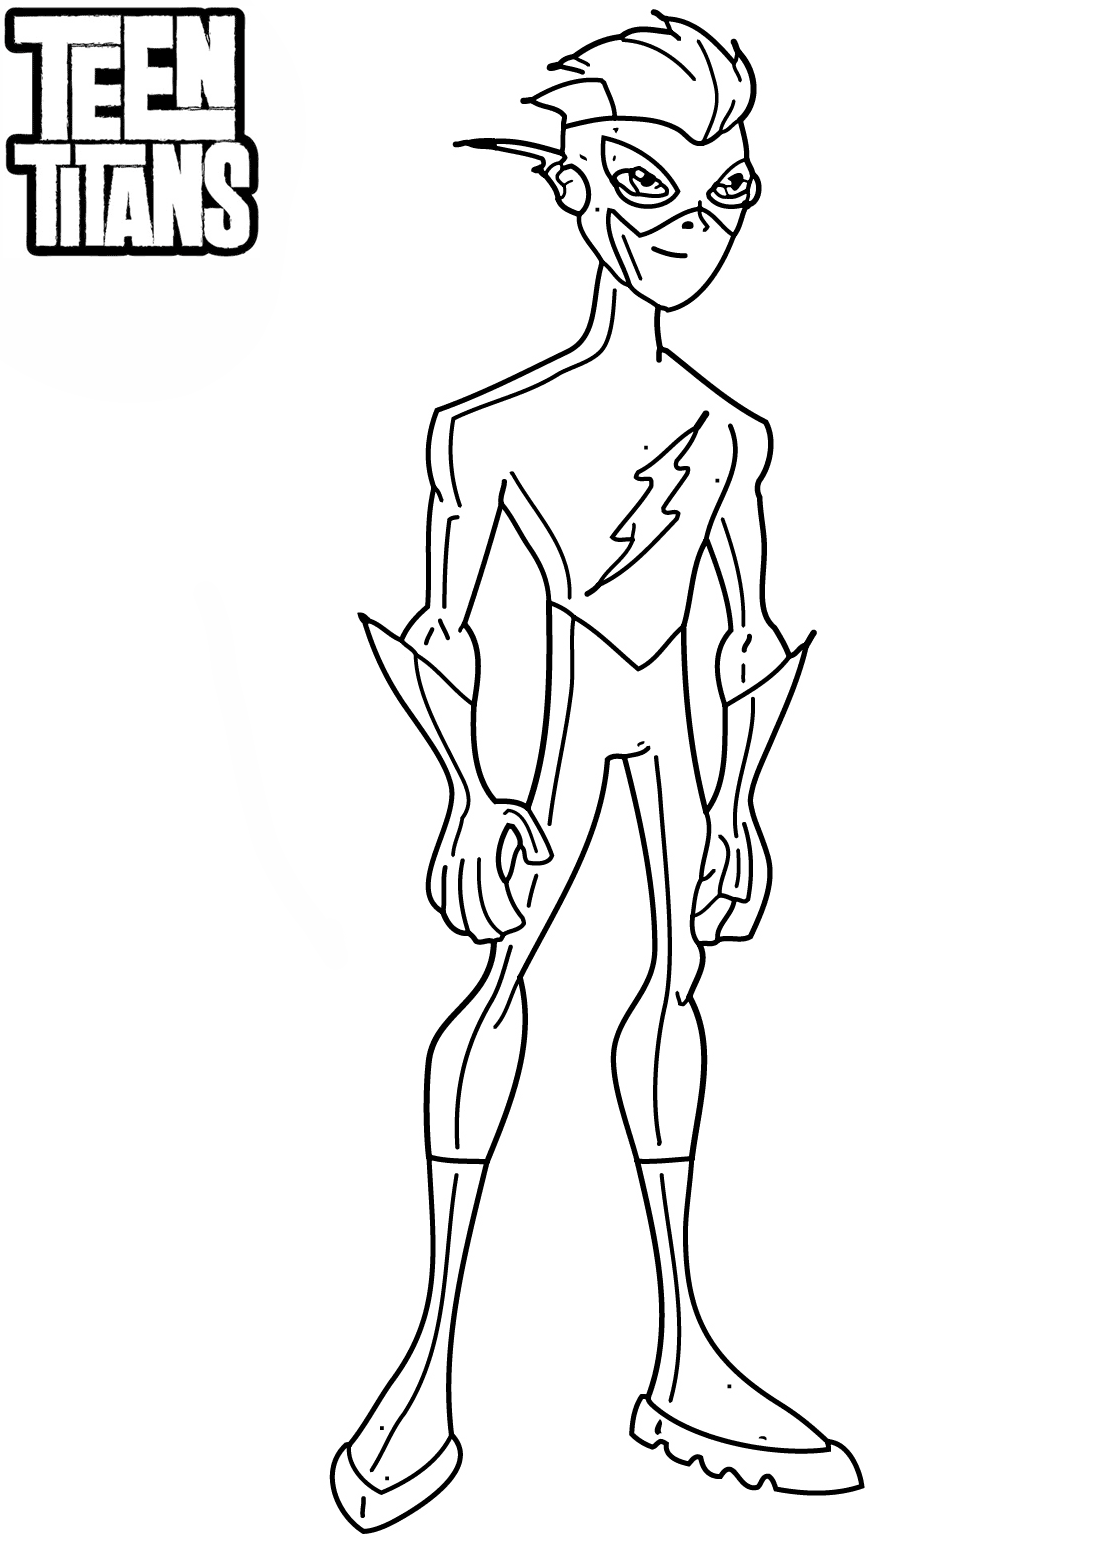 Teen Titan Is Tied Up Coloring Page - Free Printable Coloring Pages for